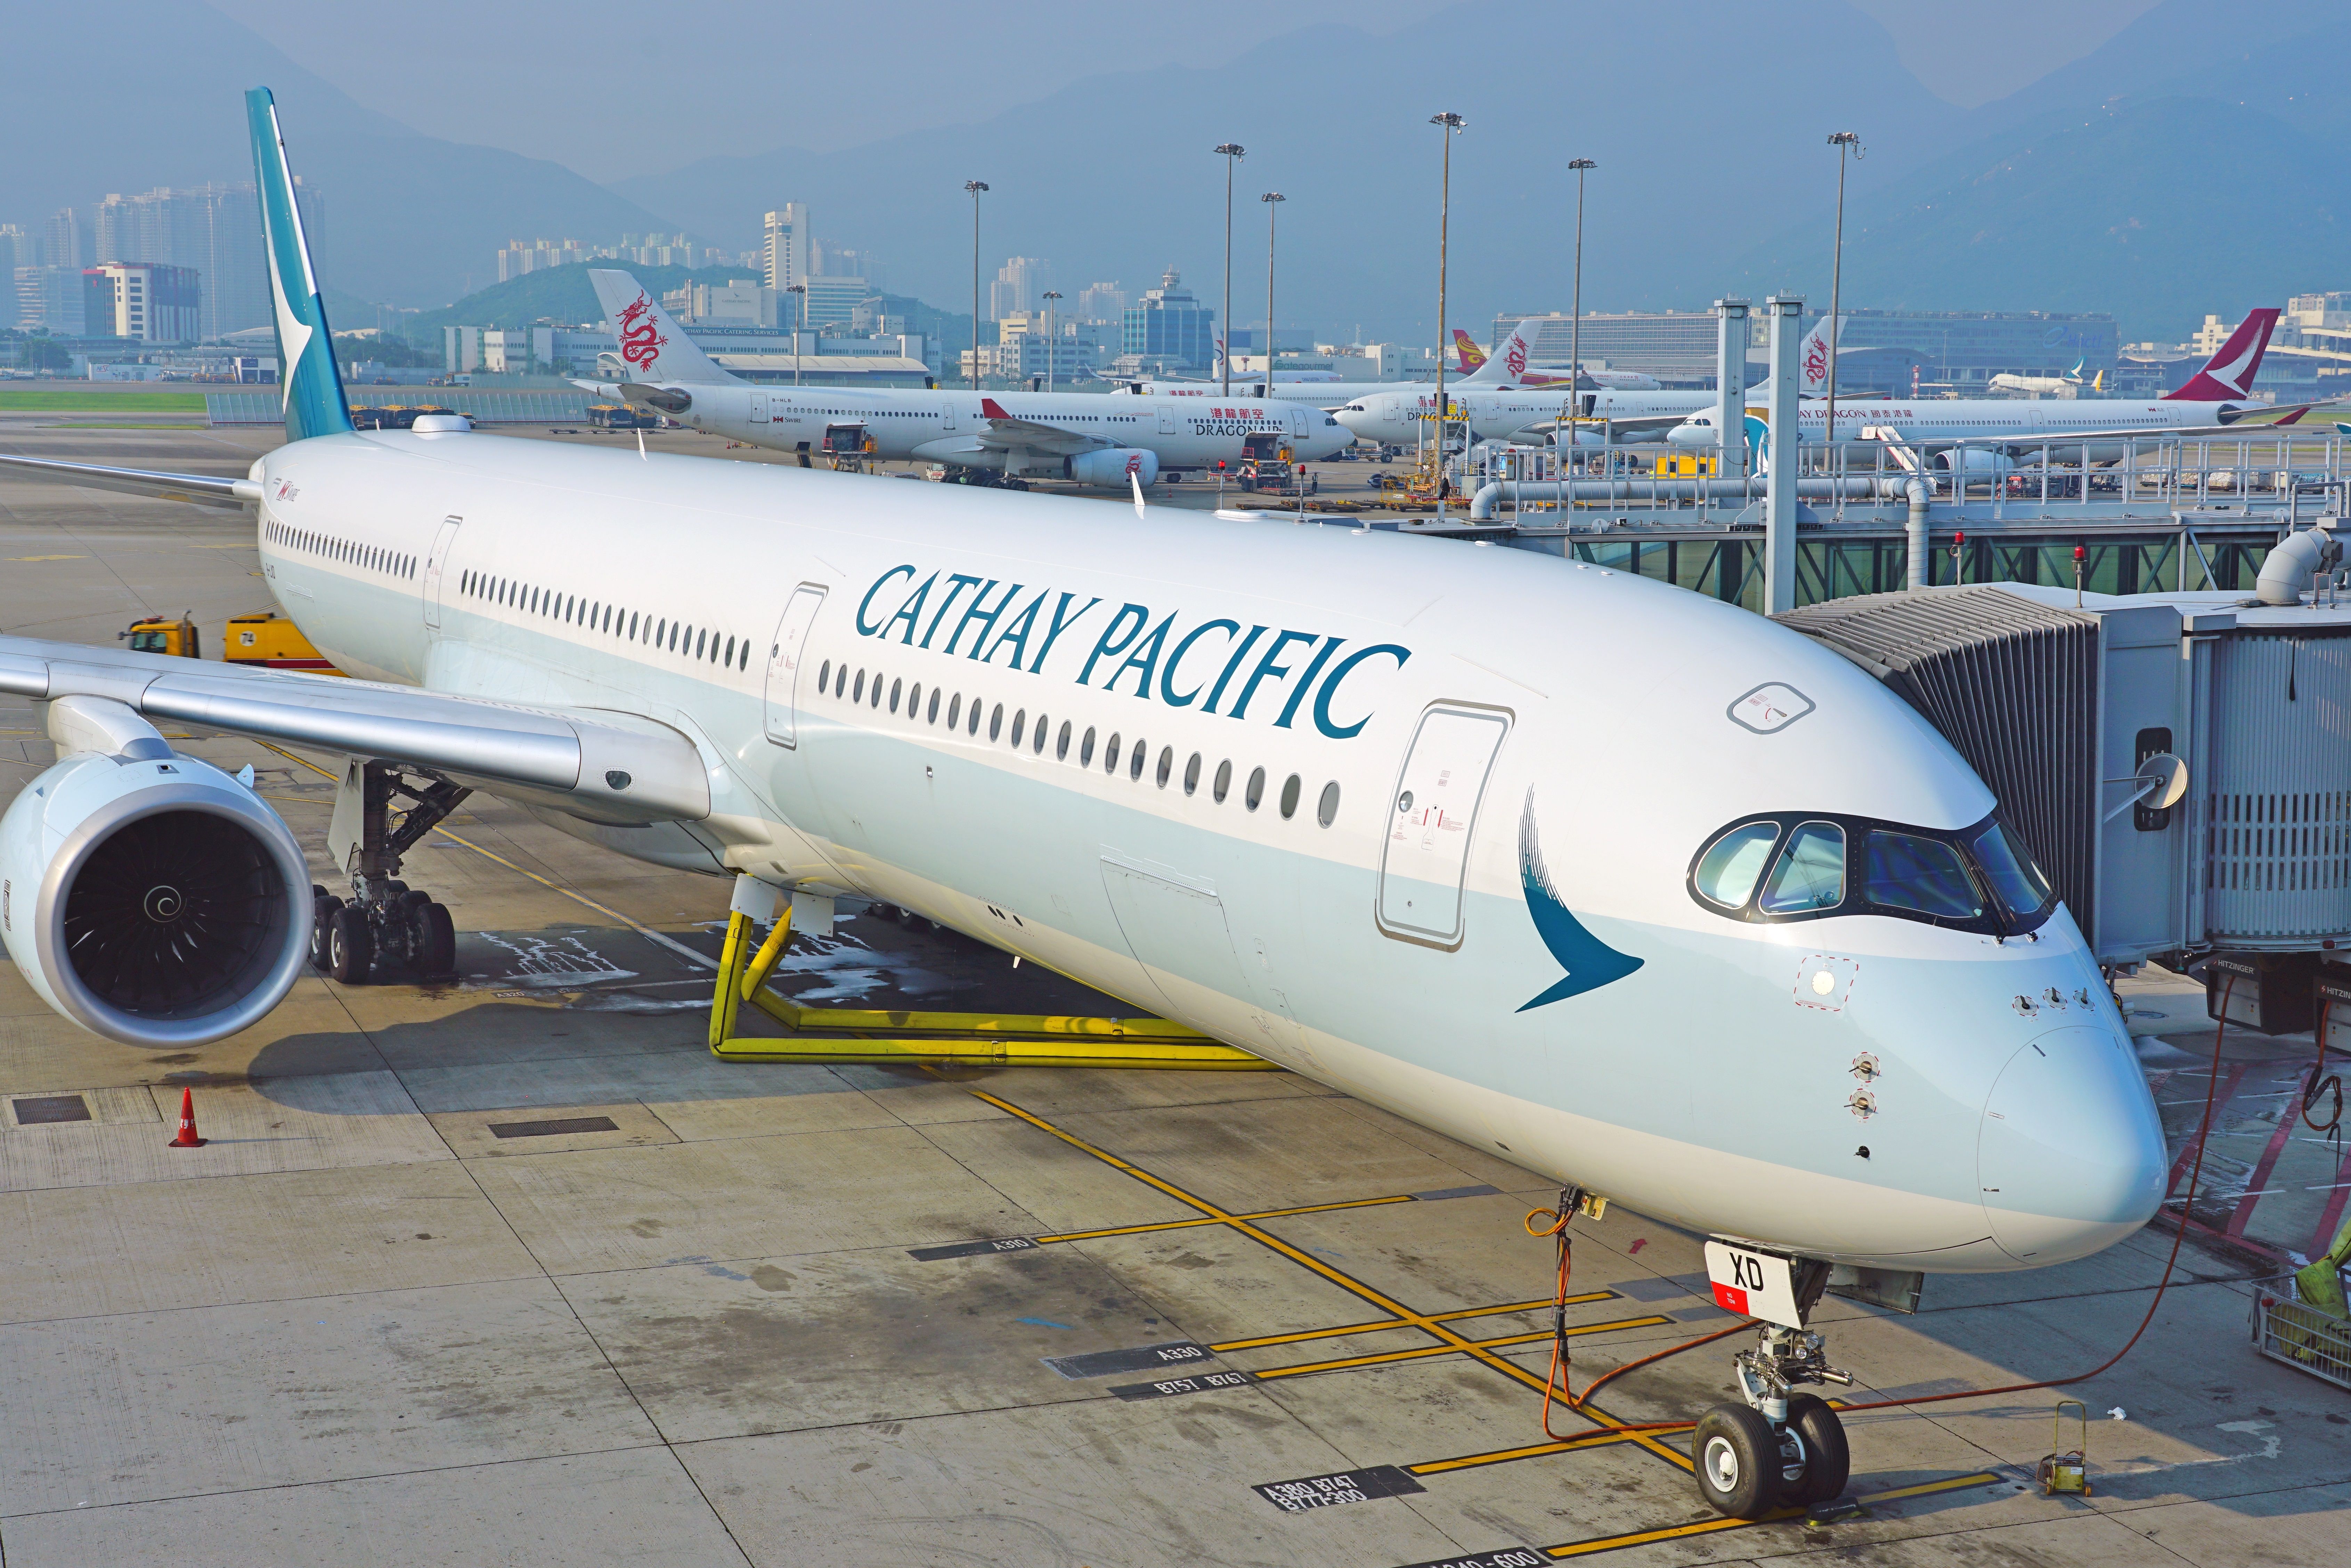 Cathay Pacific A350-900 on stand